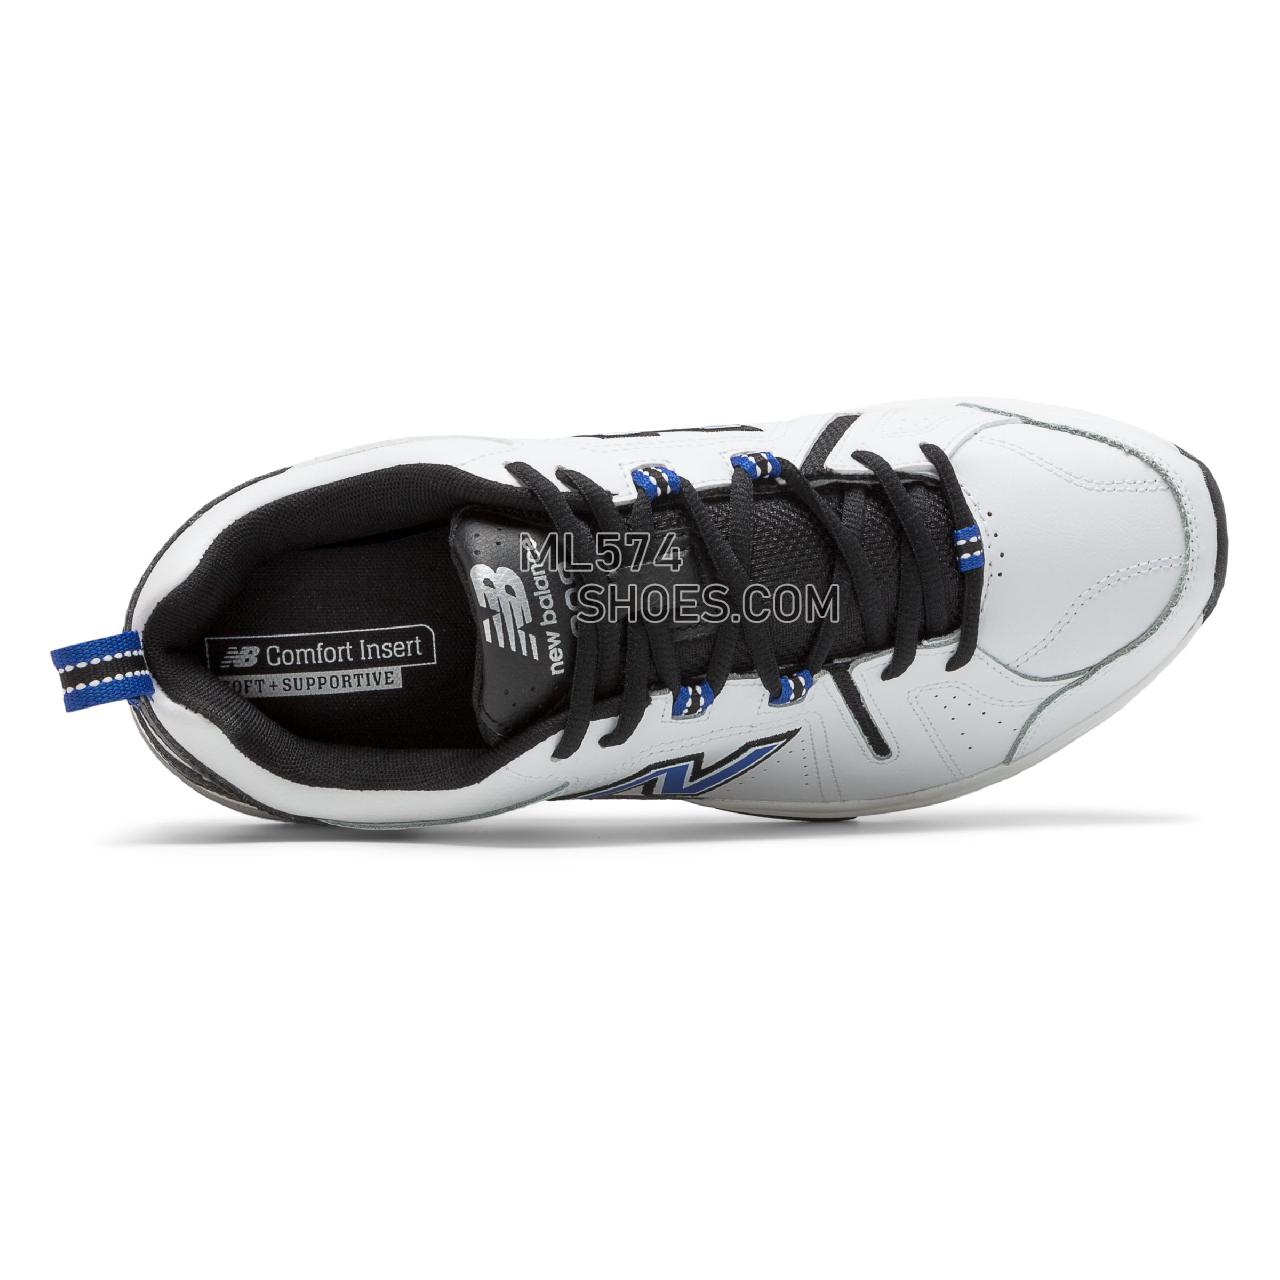 New Balance 608v5 - Men's Everyday Trainers - White with Team Royal and Black - MX608WR5